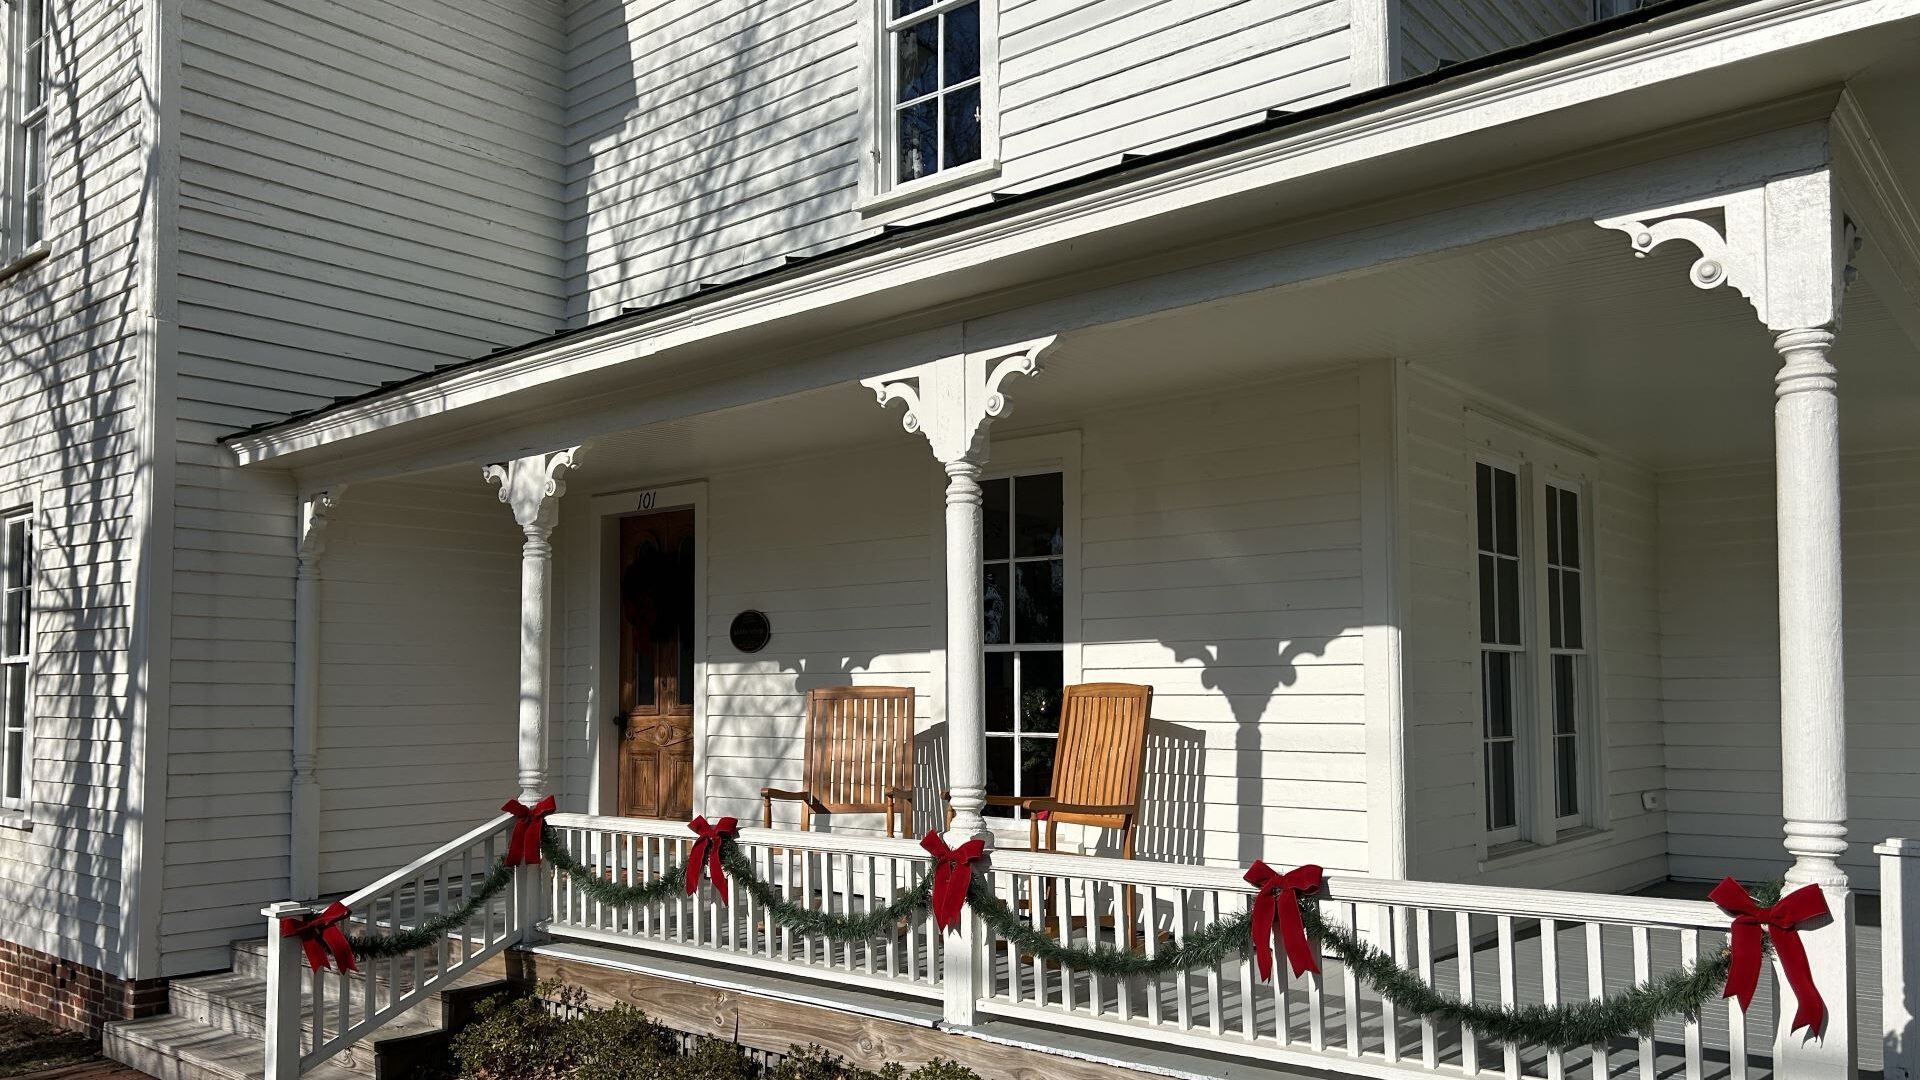 White house with porch. Green roping and red bows tied on porch railing.